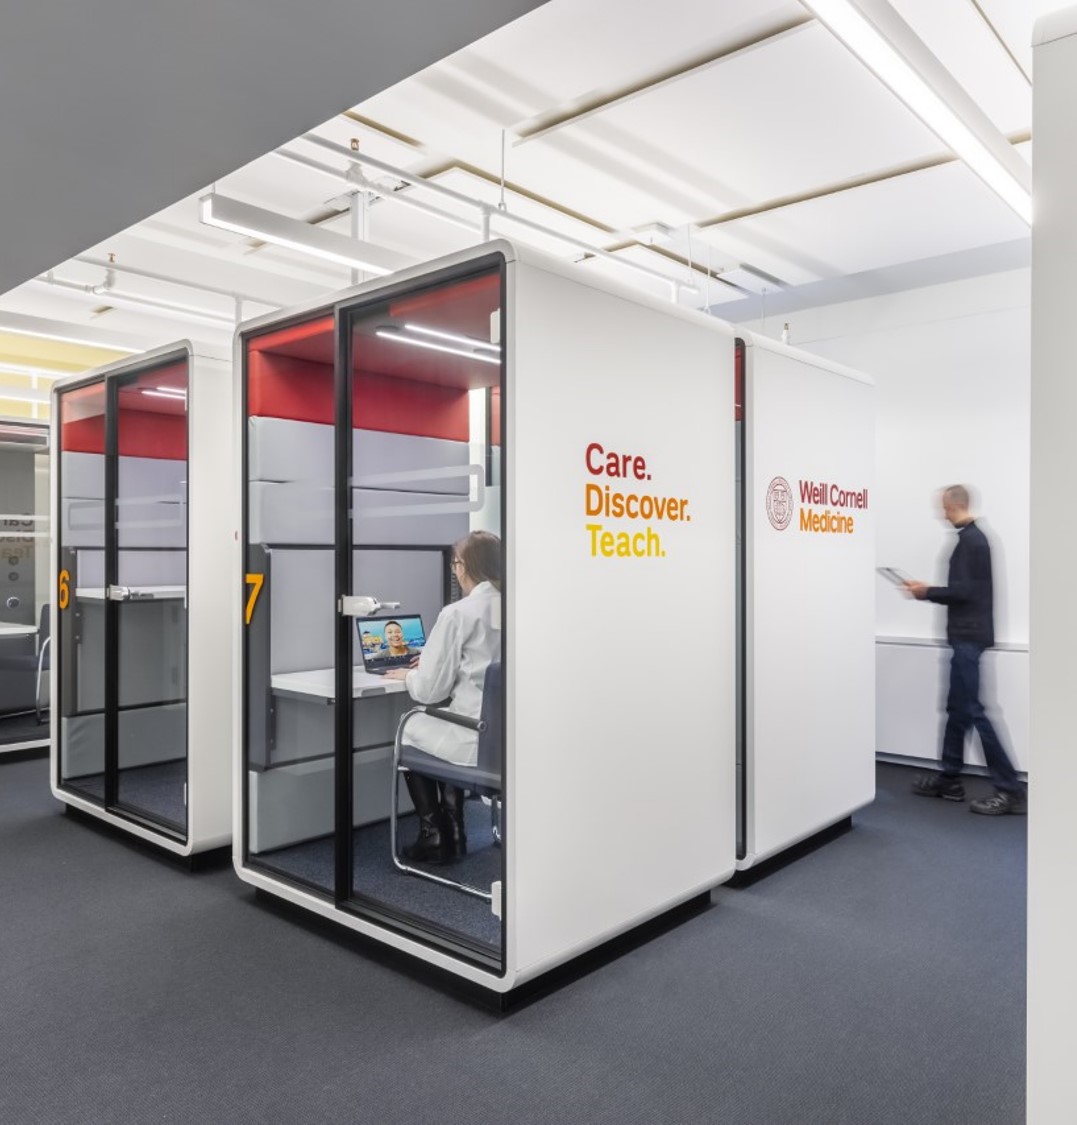 sound proof booths where telemedicine providers perform virtual visits